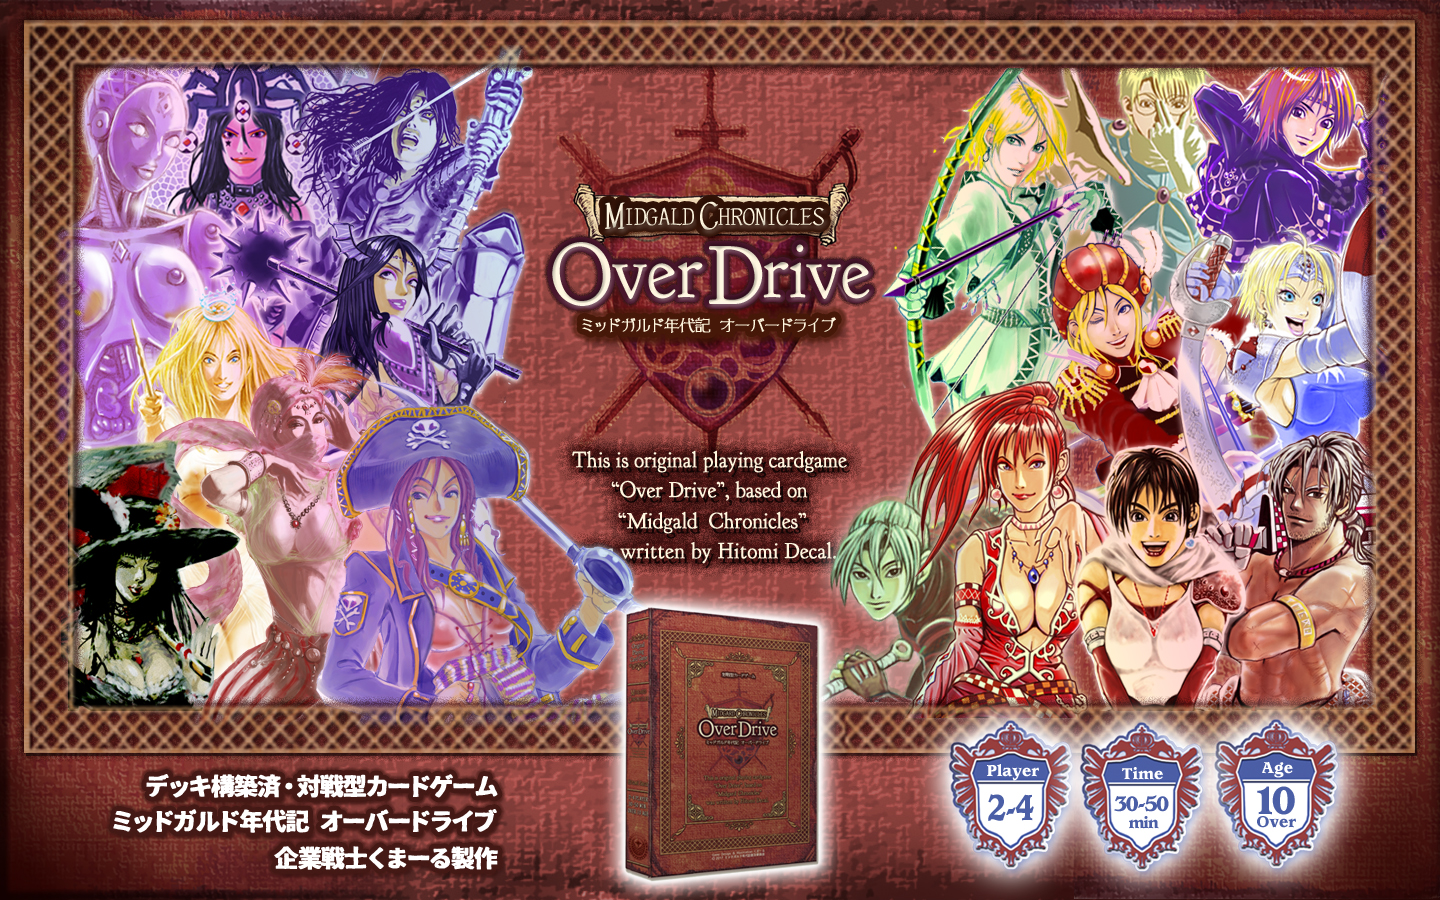 Over Drive